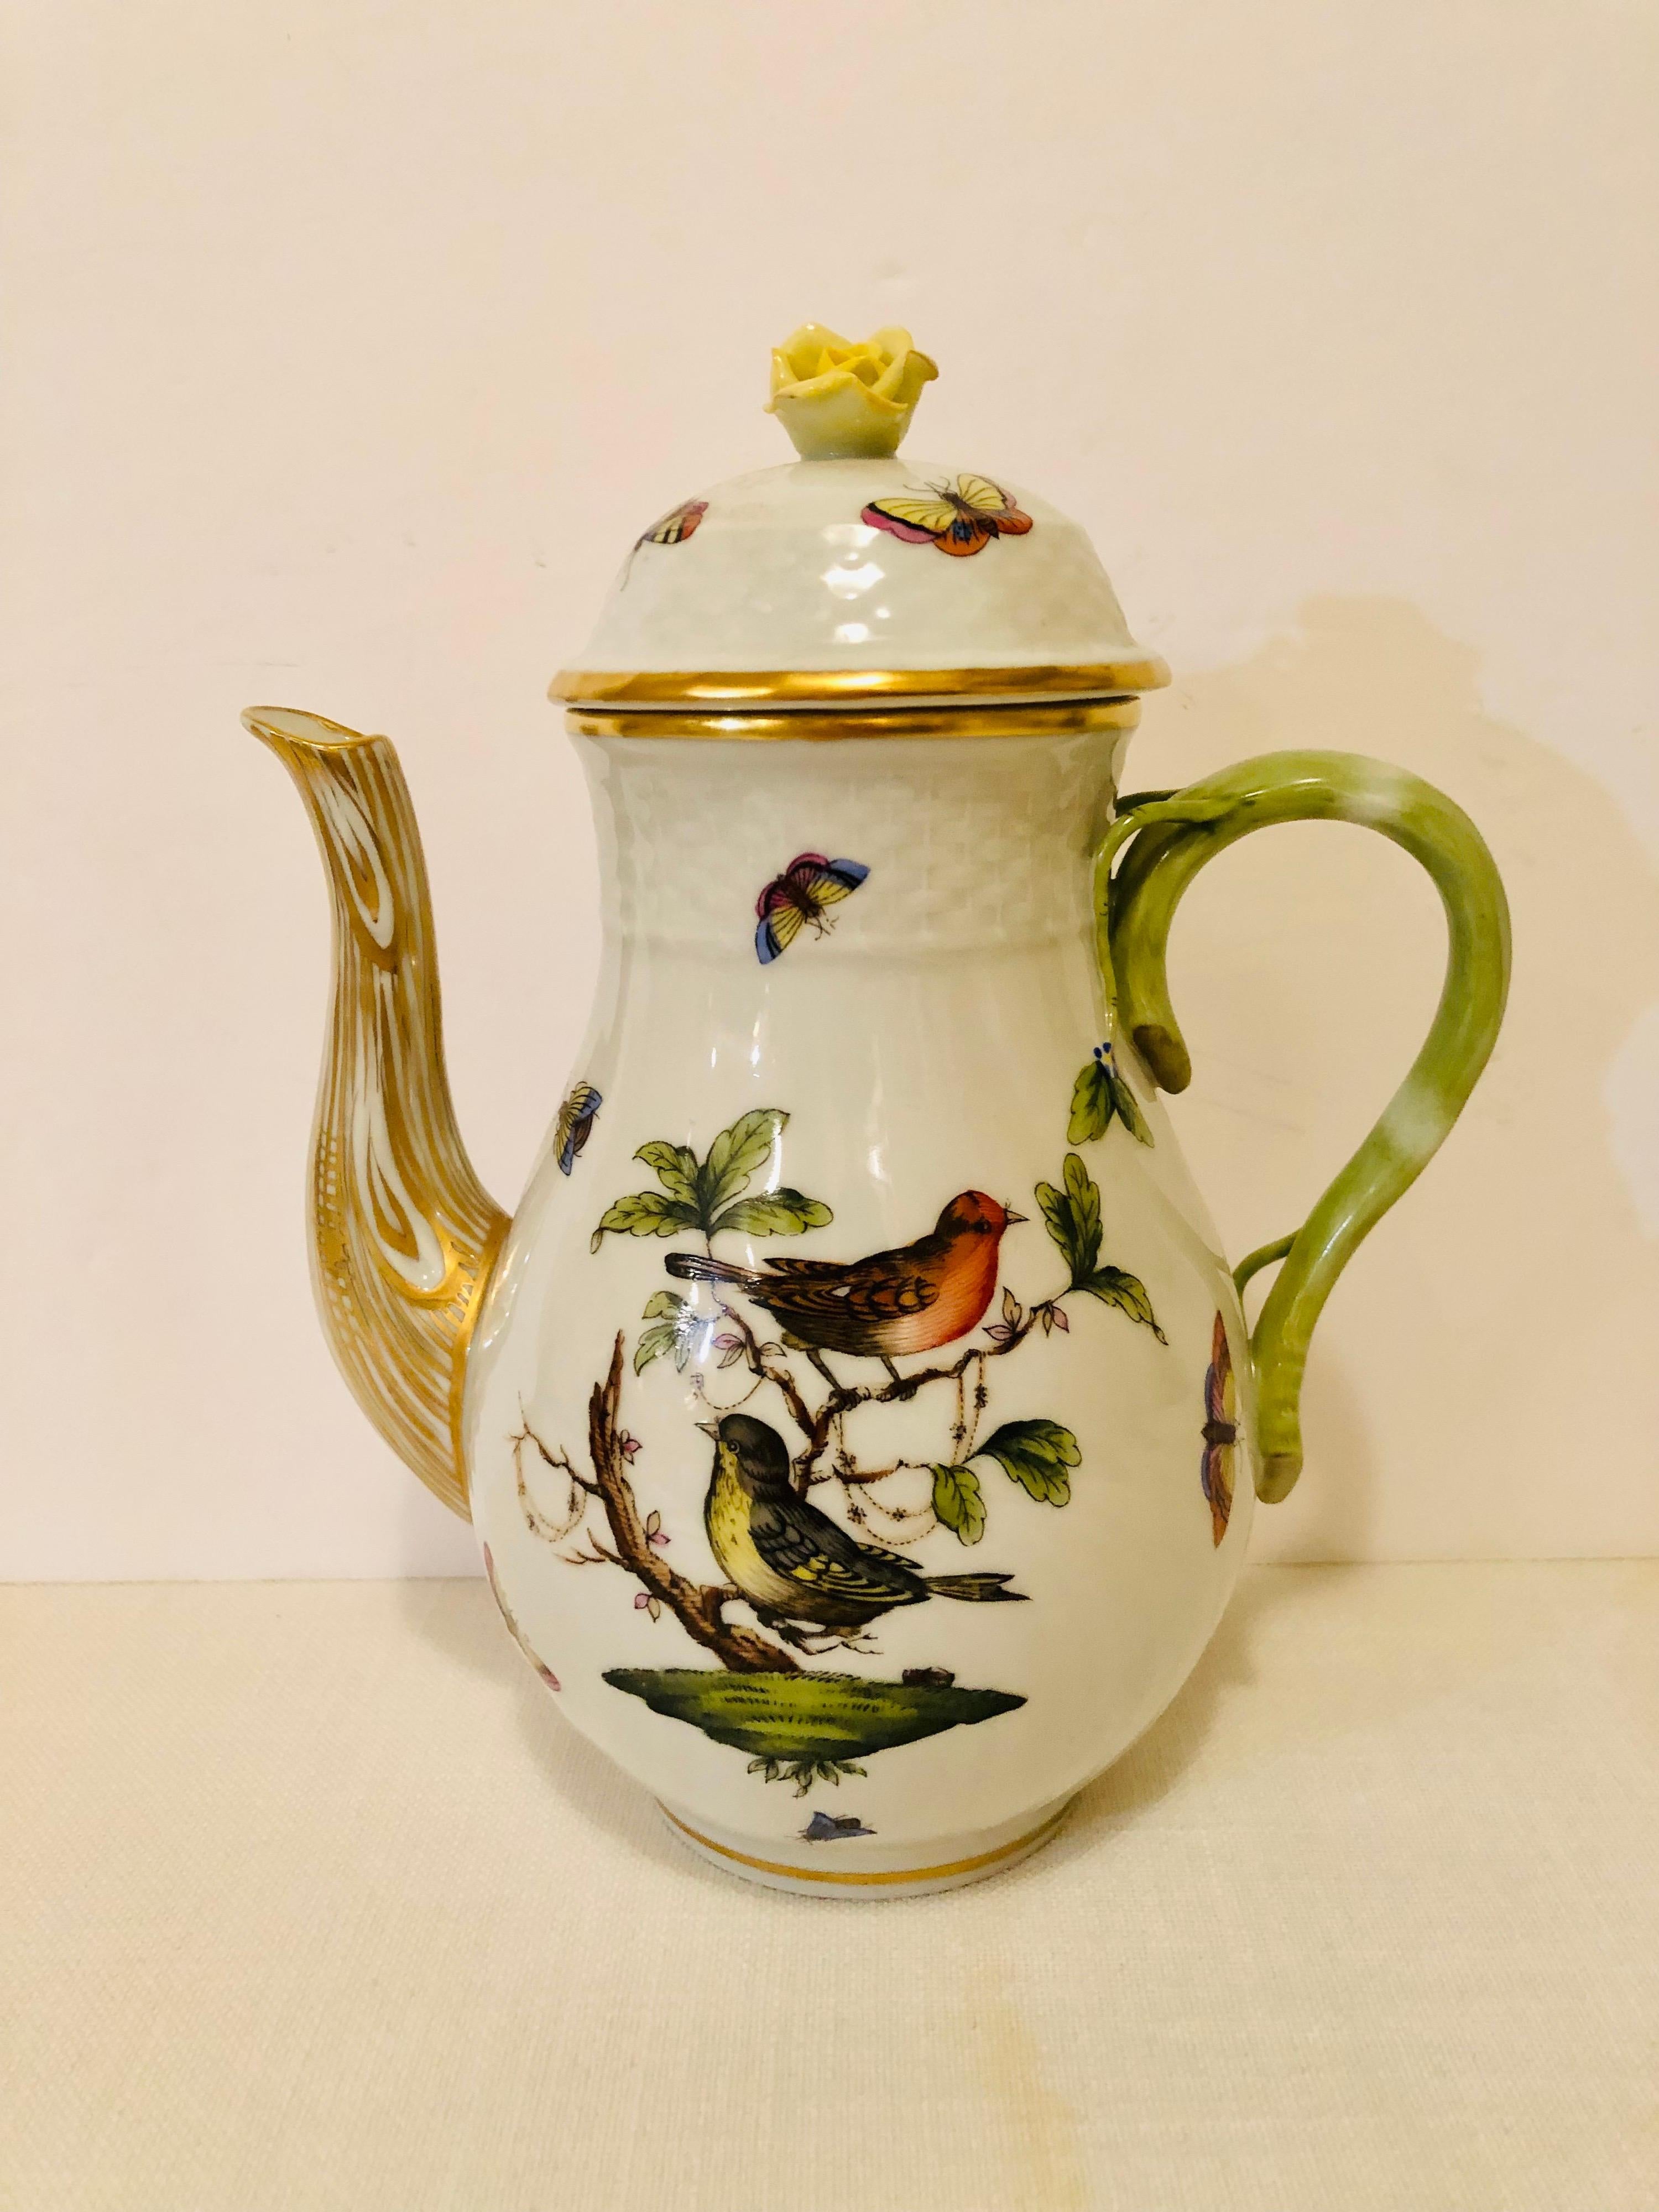 This is a beautiful Herend Rothschild bird coffee pot hand painted with two birds on both sides, and decorated with butterflies and insects on a white ground. The top of the coffee pot has a raised beautiful yellow rose painted with accents of